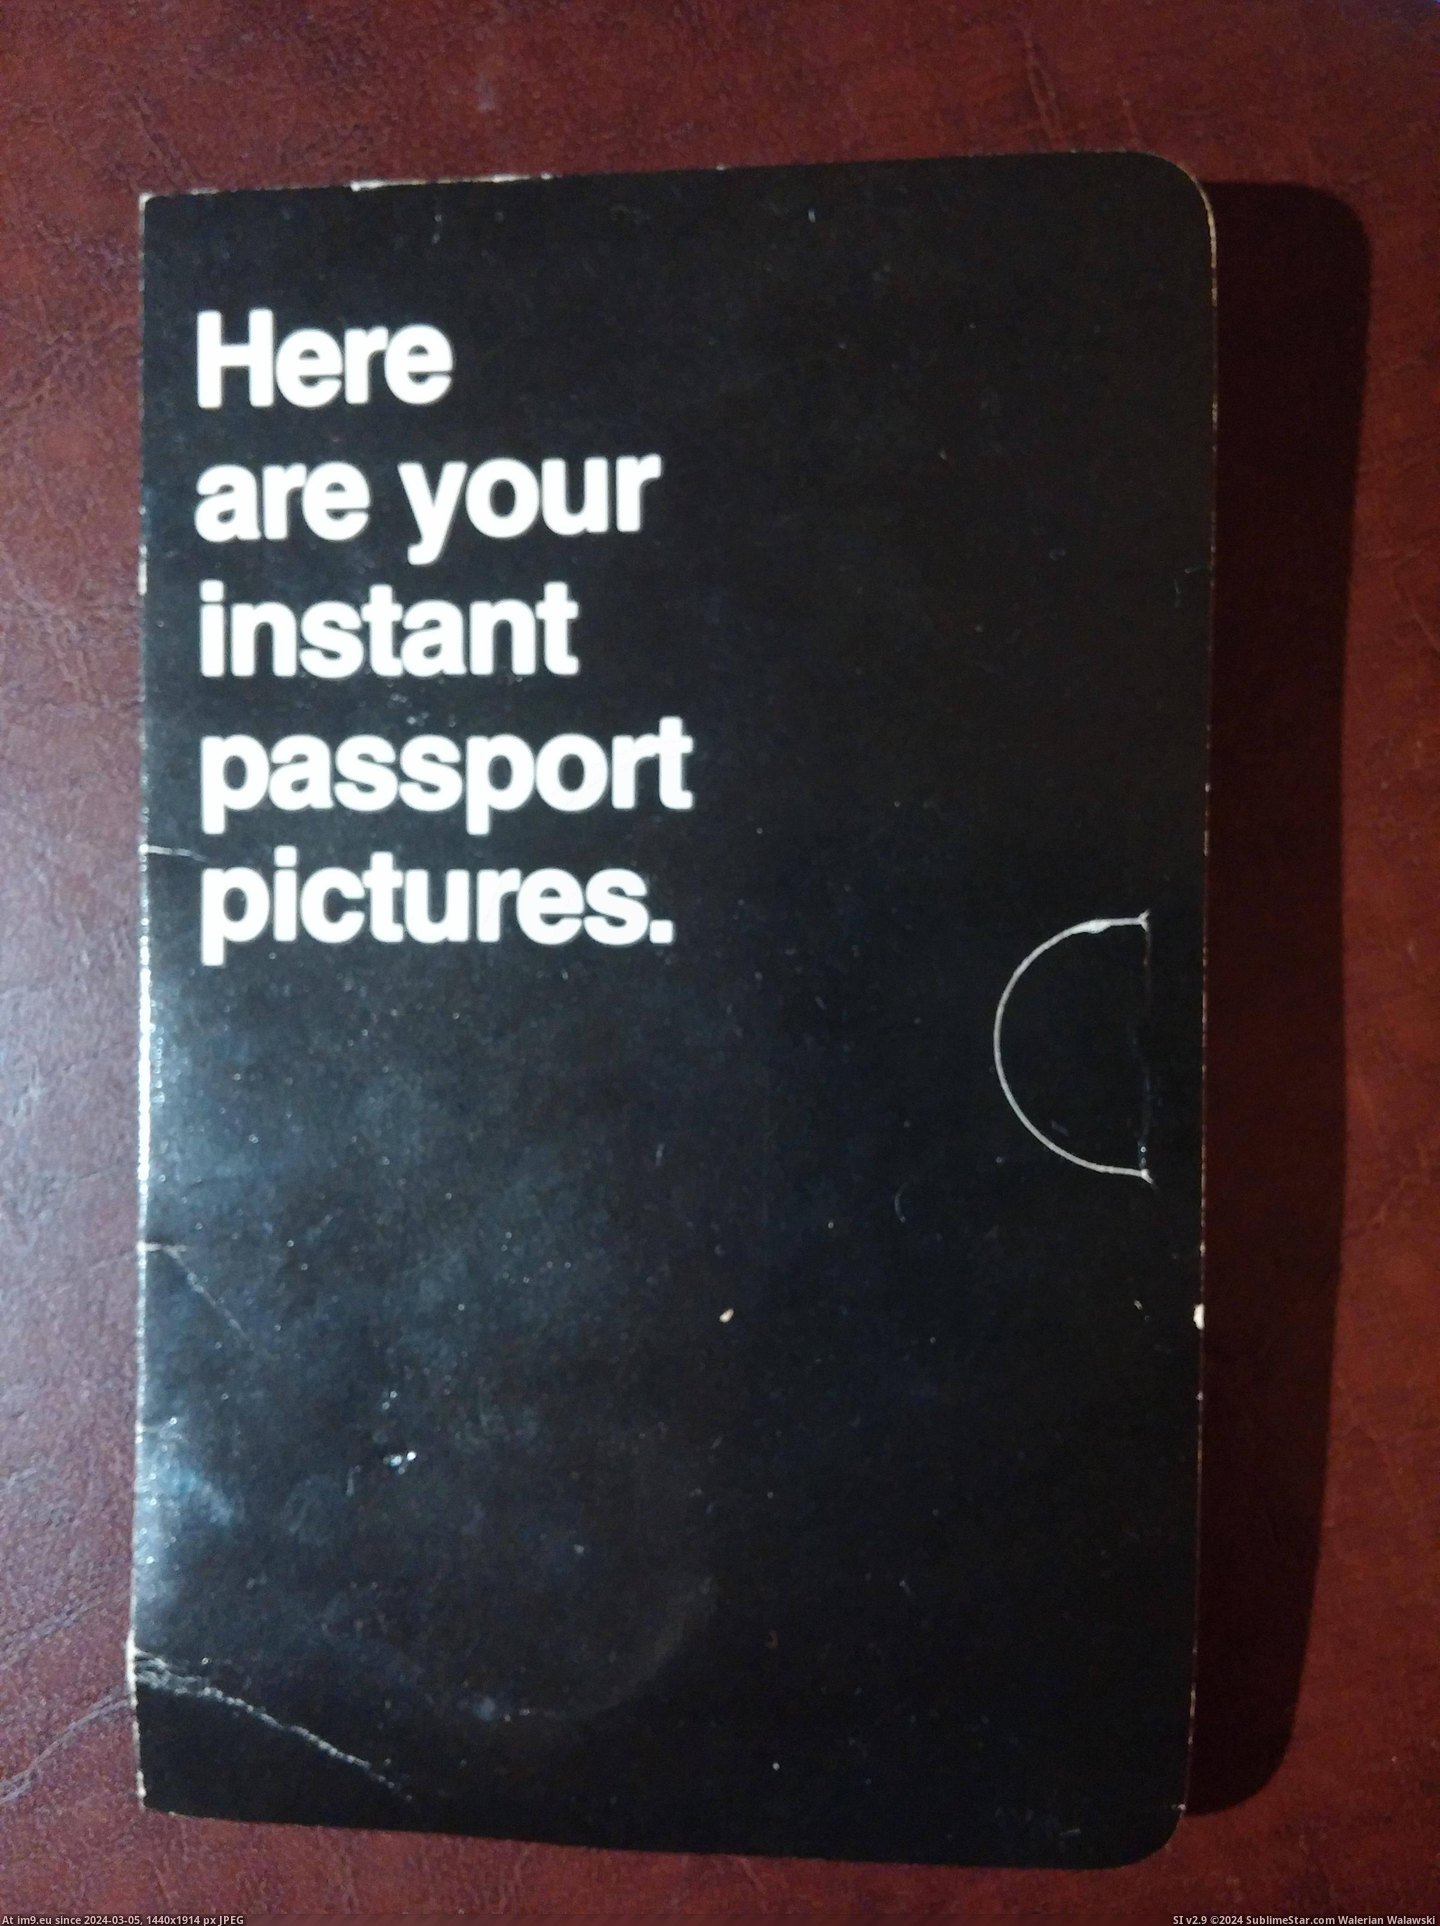 #Photo #Card #80s #Envelope #Passport #Humanity #Cards [Mildlyinteresting] This passport photo envelope from the '80s looks like a Cards Against Humanity card Pic. (Obraz z album My r/MILDLYINTERESTING favs))